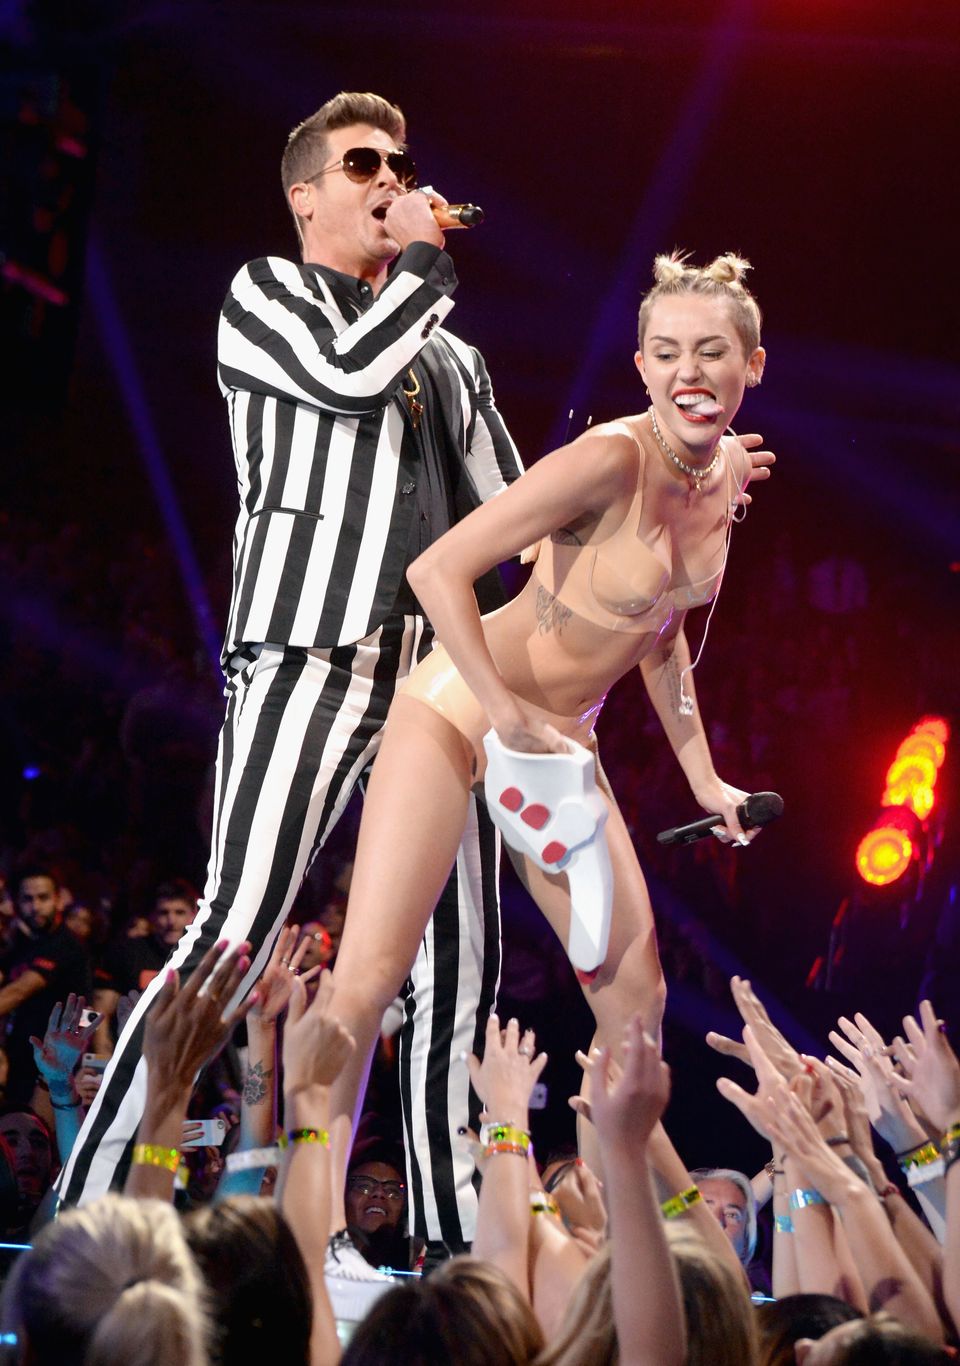 August 2013 - Twerking On Robin Thicke At The VMAs